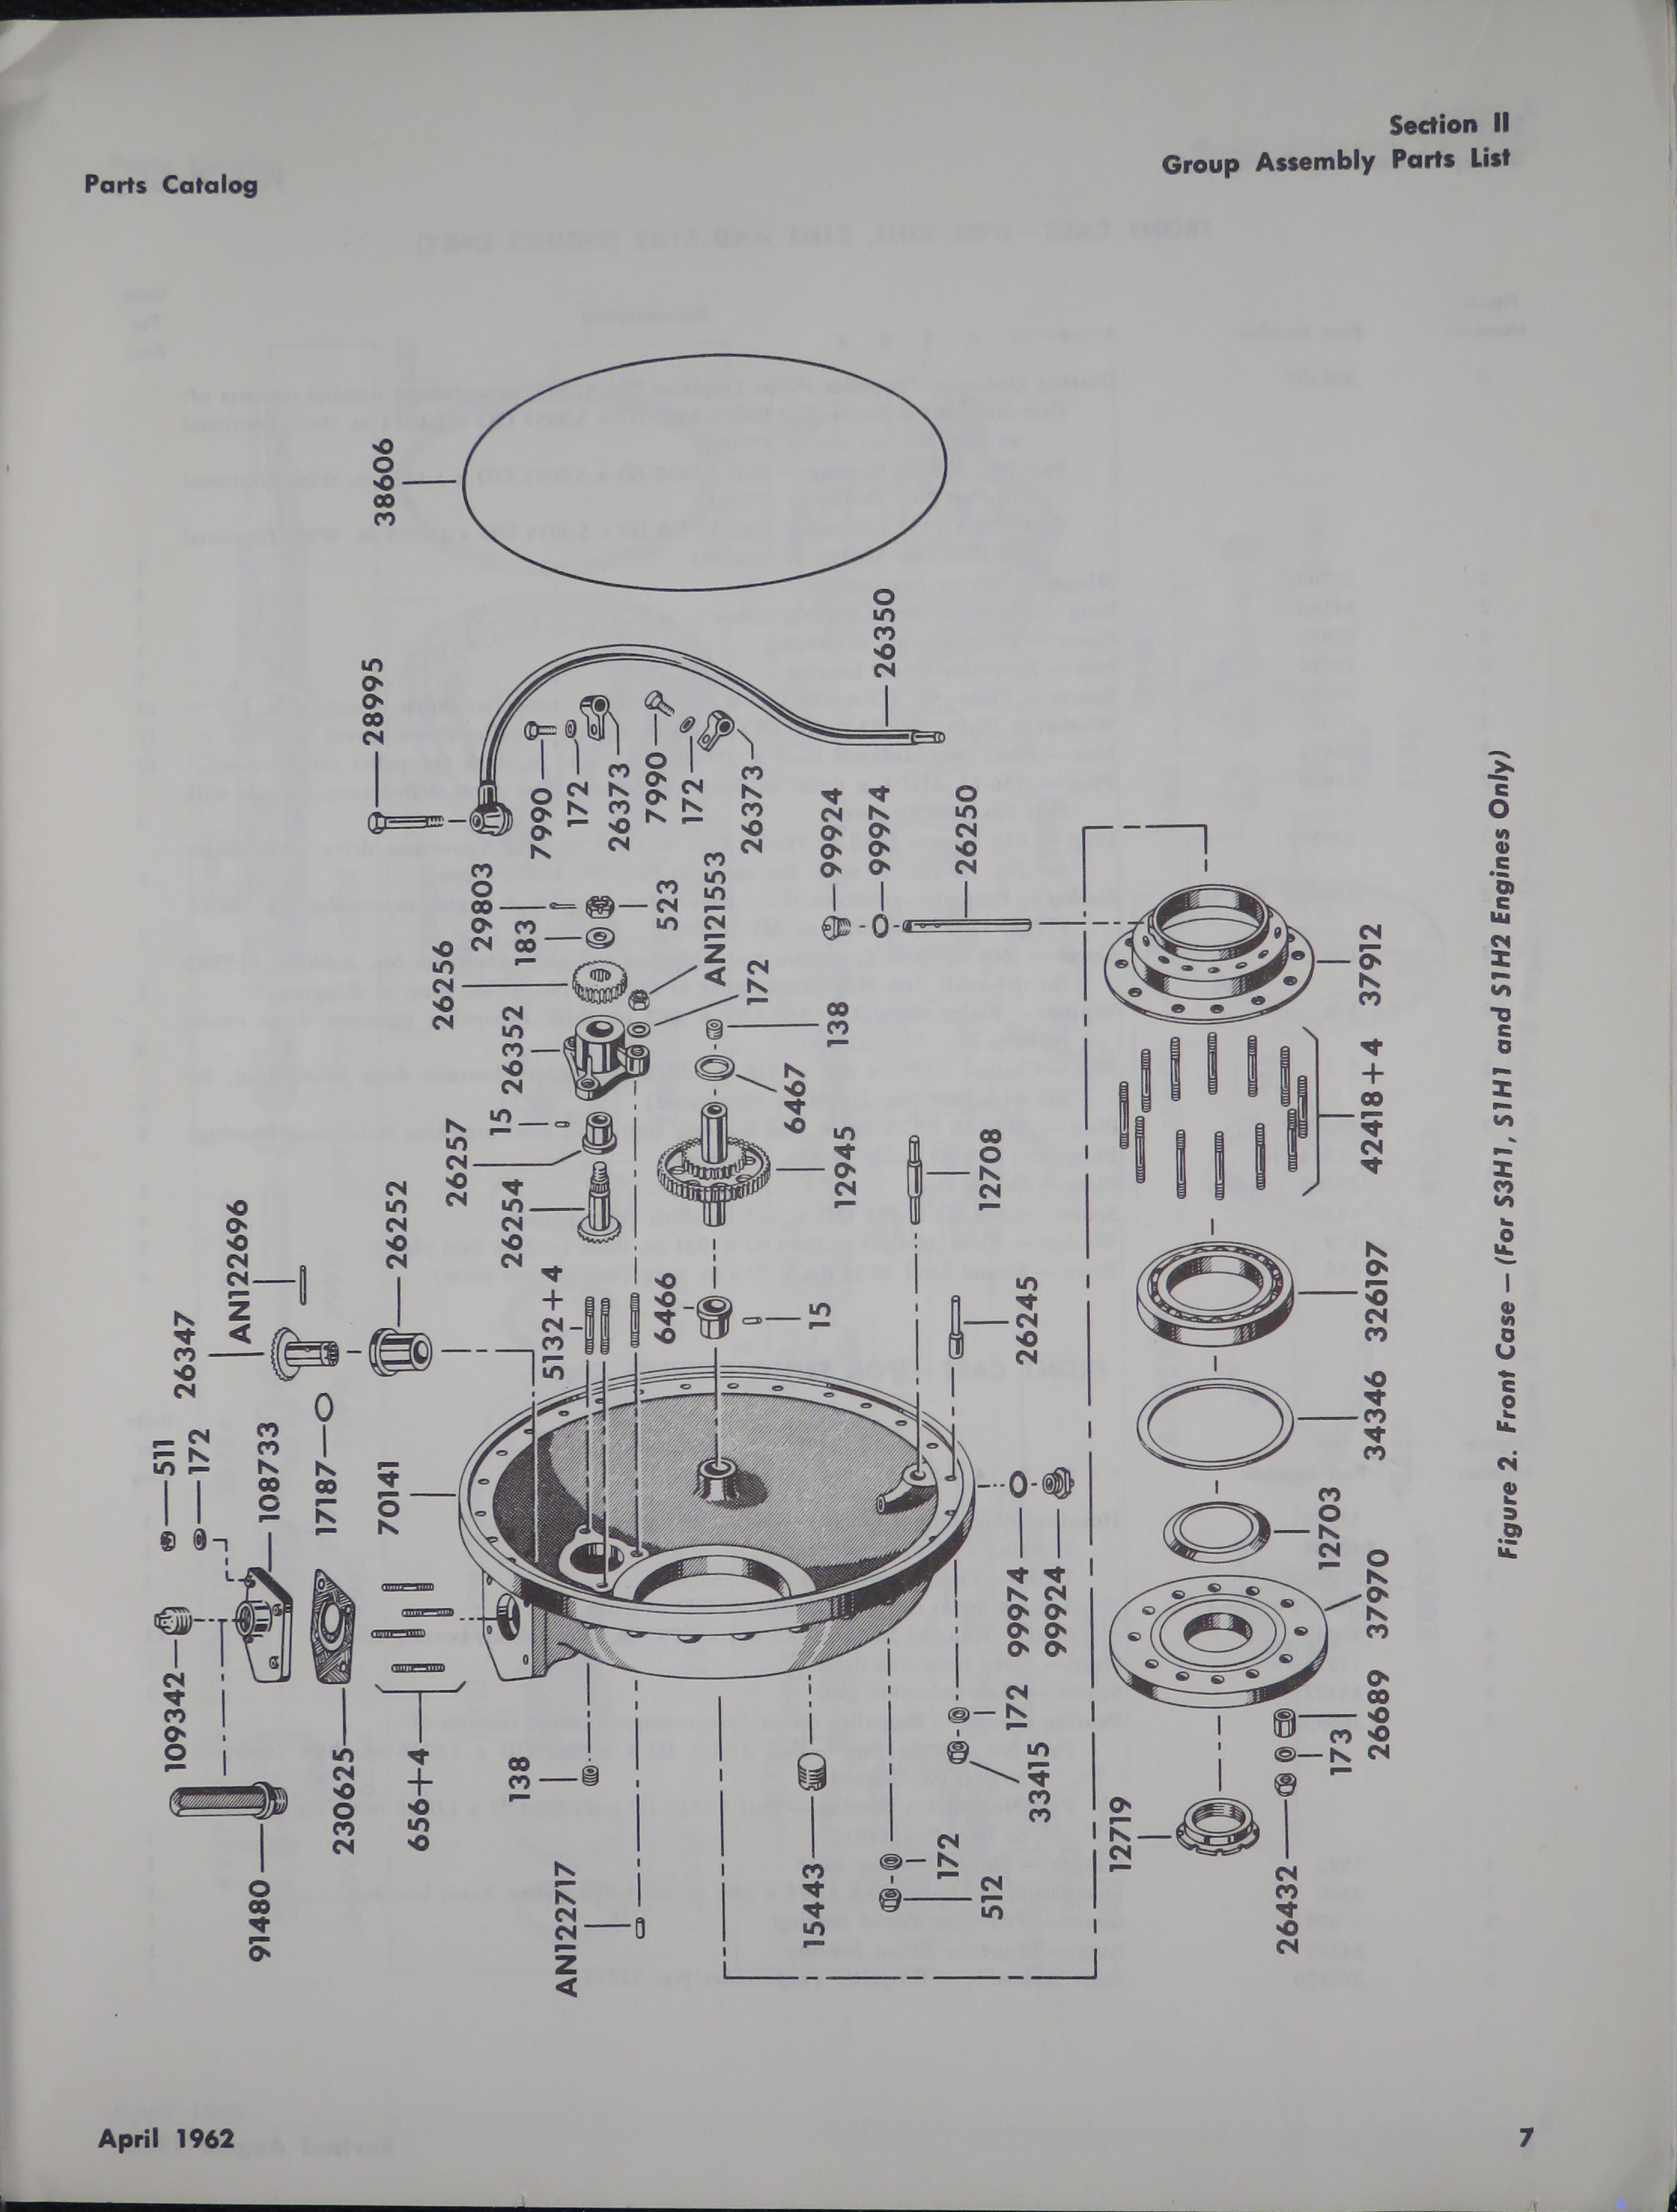 Sample page 13 from AirCorps Library document: Illustrated Parts Catalog for R-1340 Wasp Series Engines